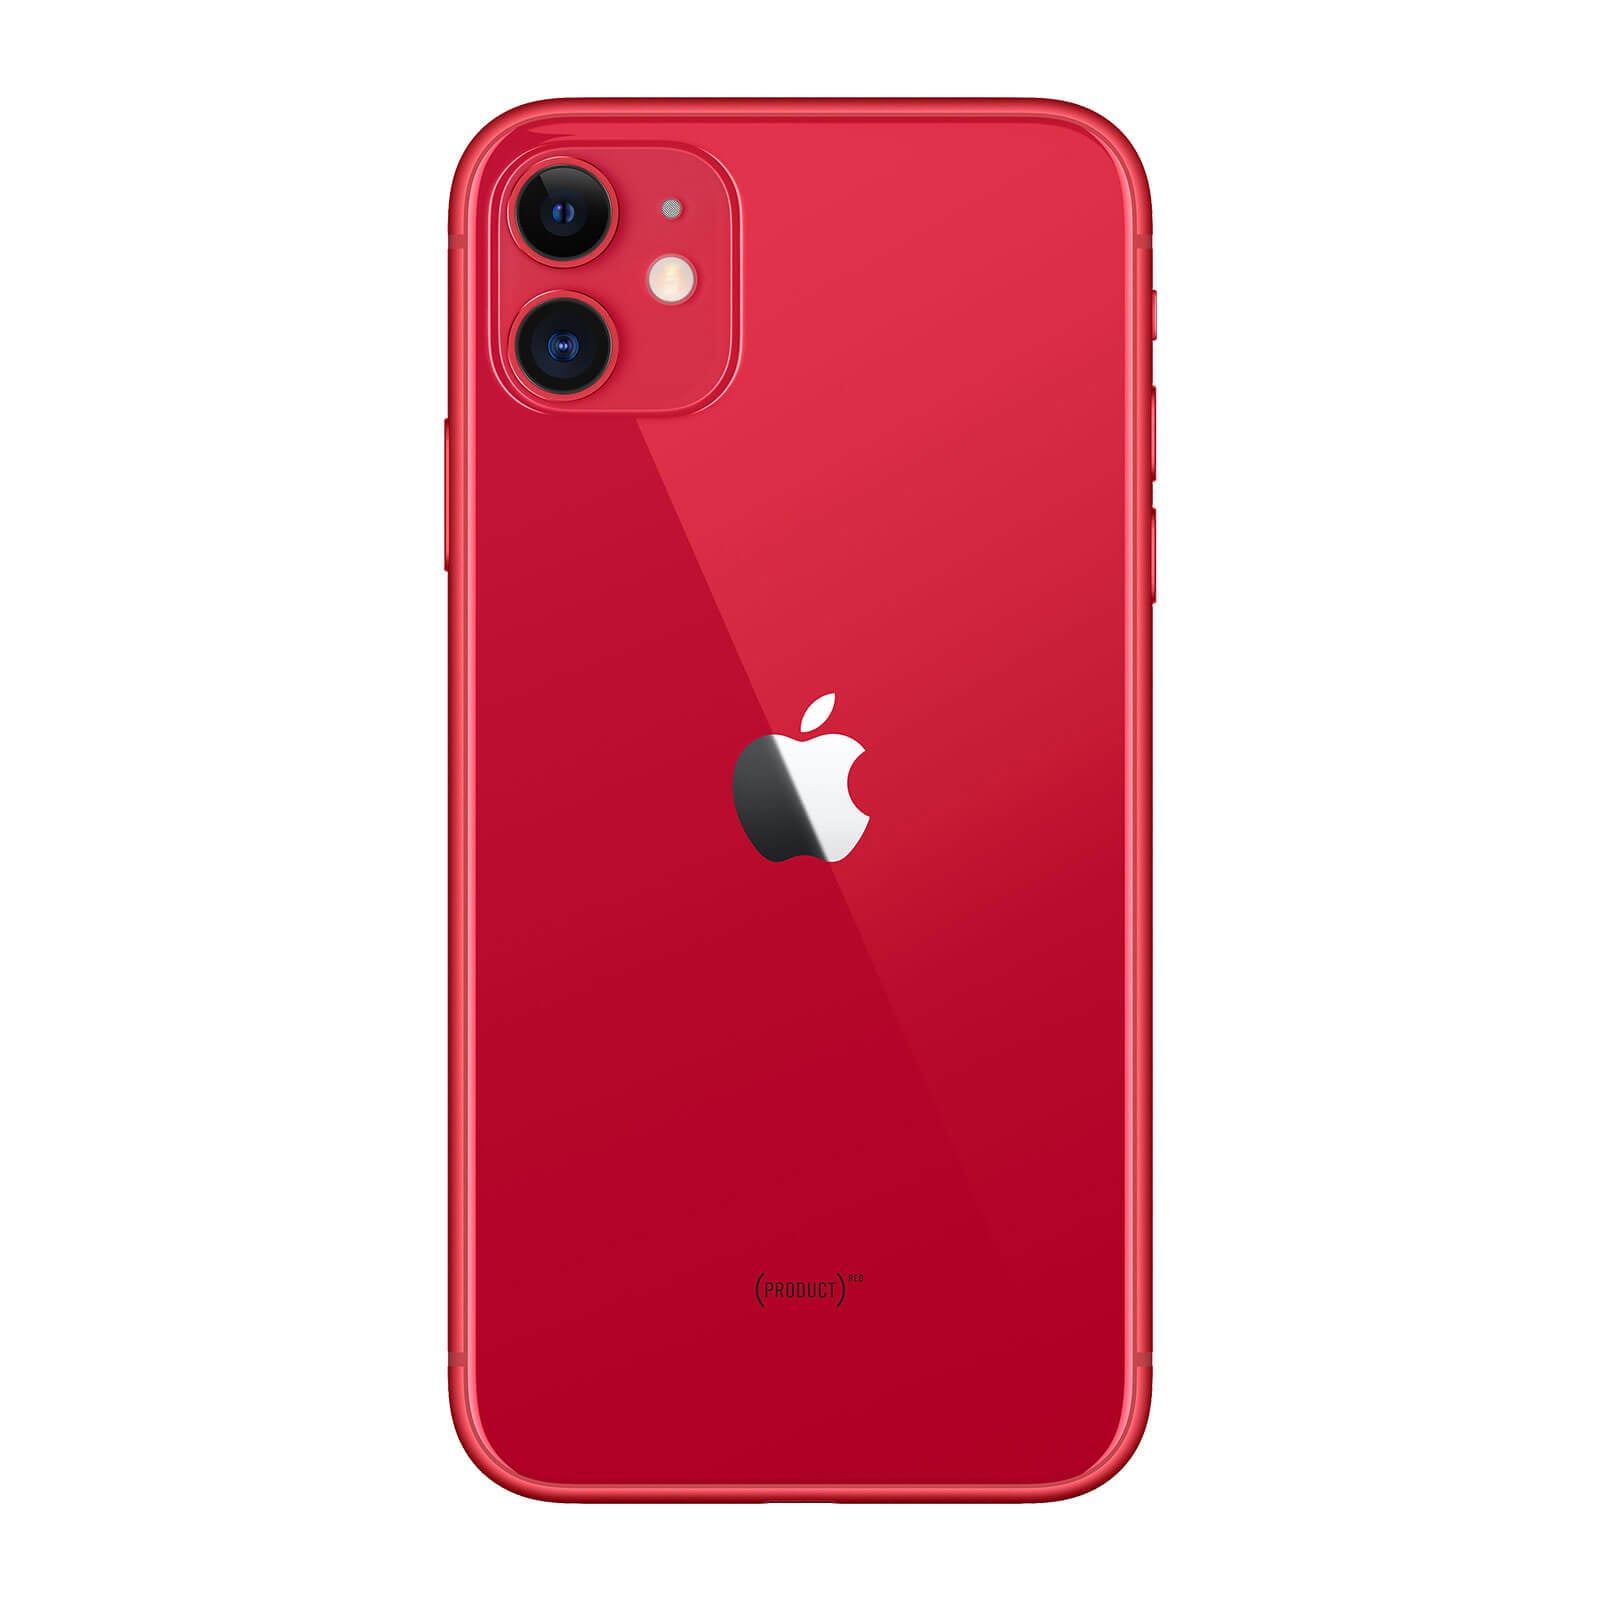 Apple iPhone 11 128GB Product Red Good - Sprint